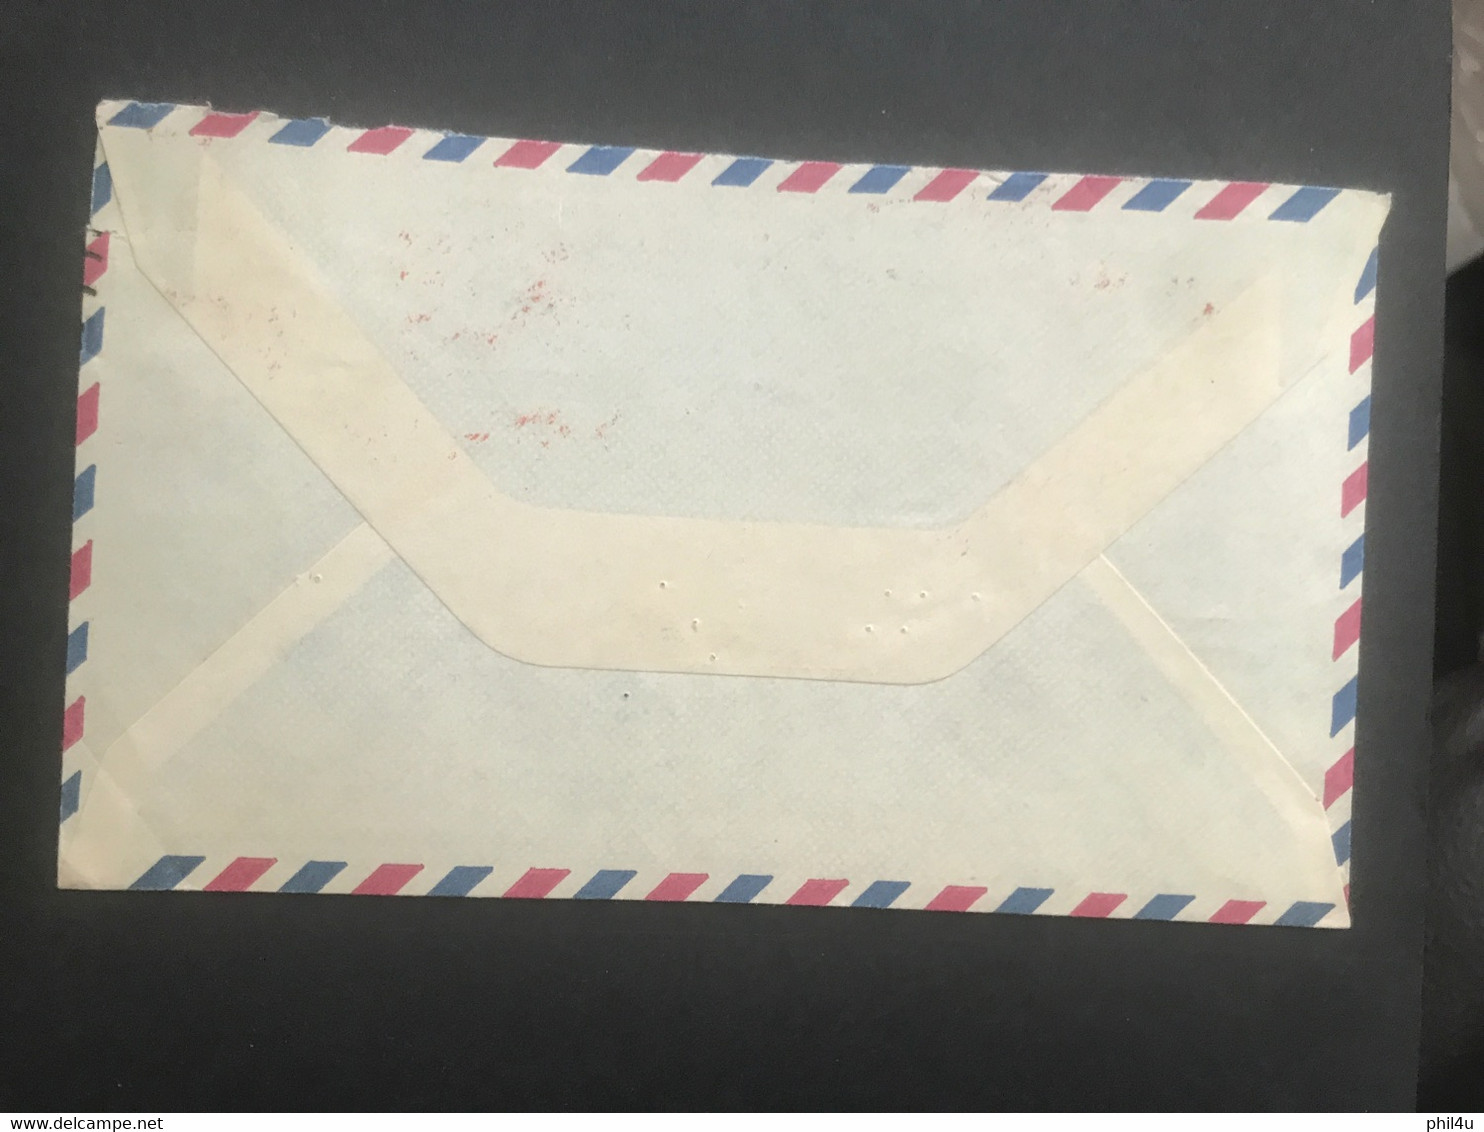 5 cover to Holland all franking machine sent from South Africa see photos always welcome your offers